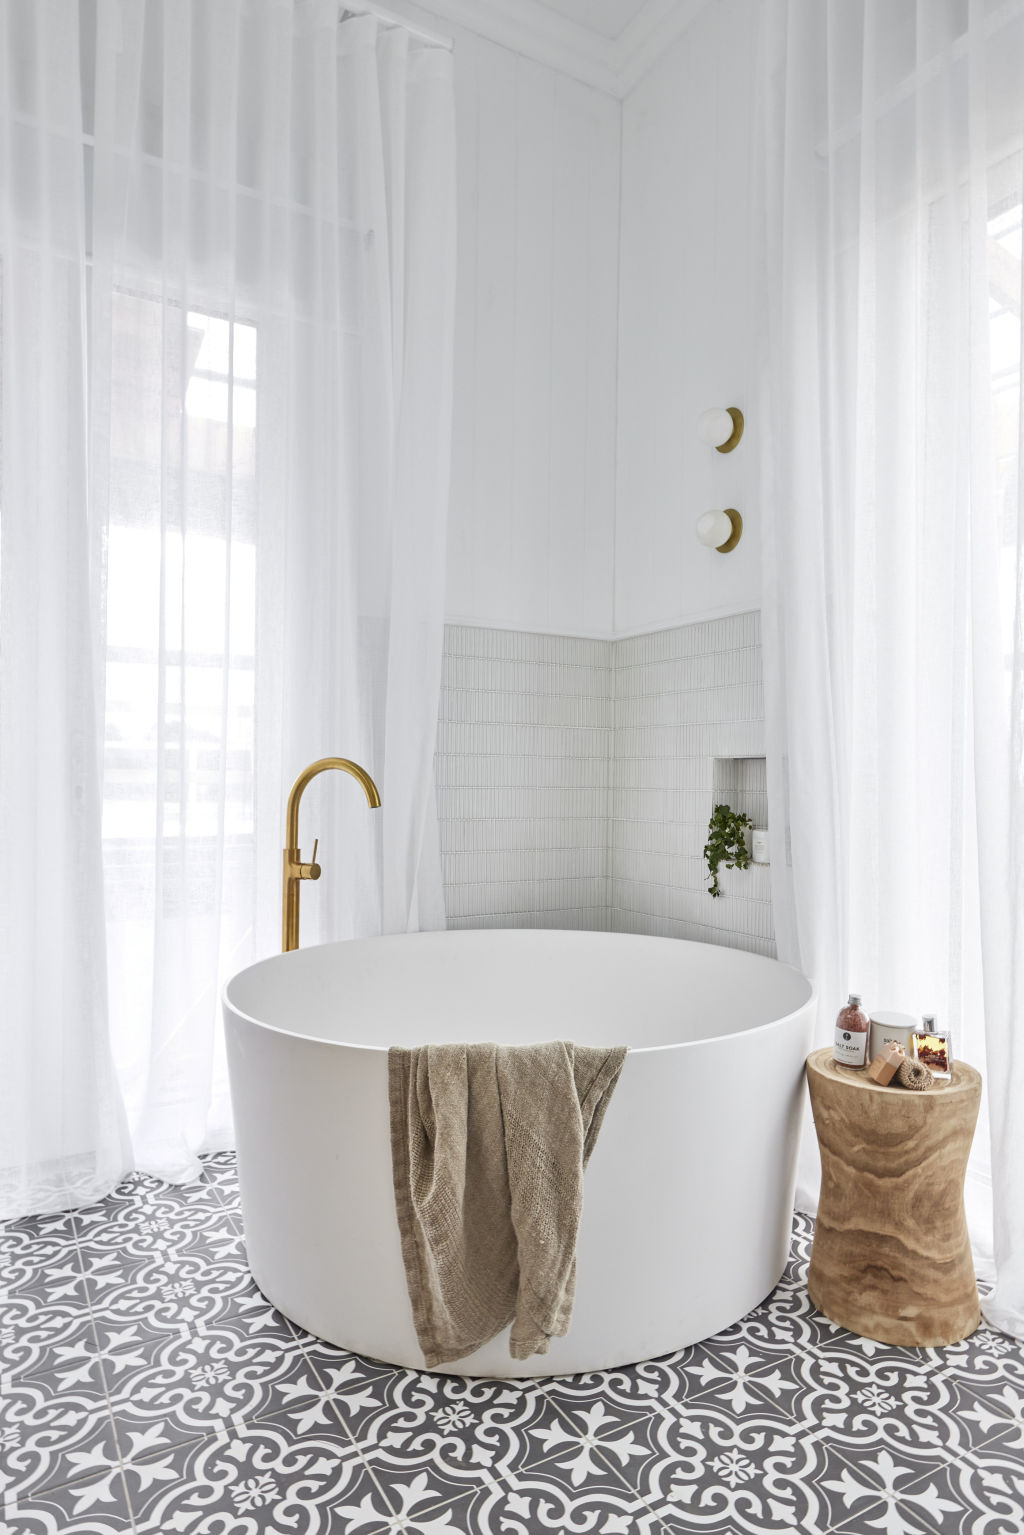 Omar and Oz impressed with their tub for two and floor-to-ceiling curtains. Photo: Nine